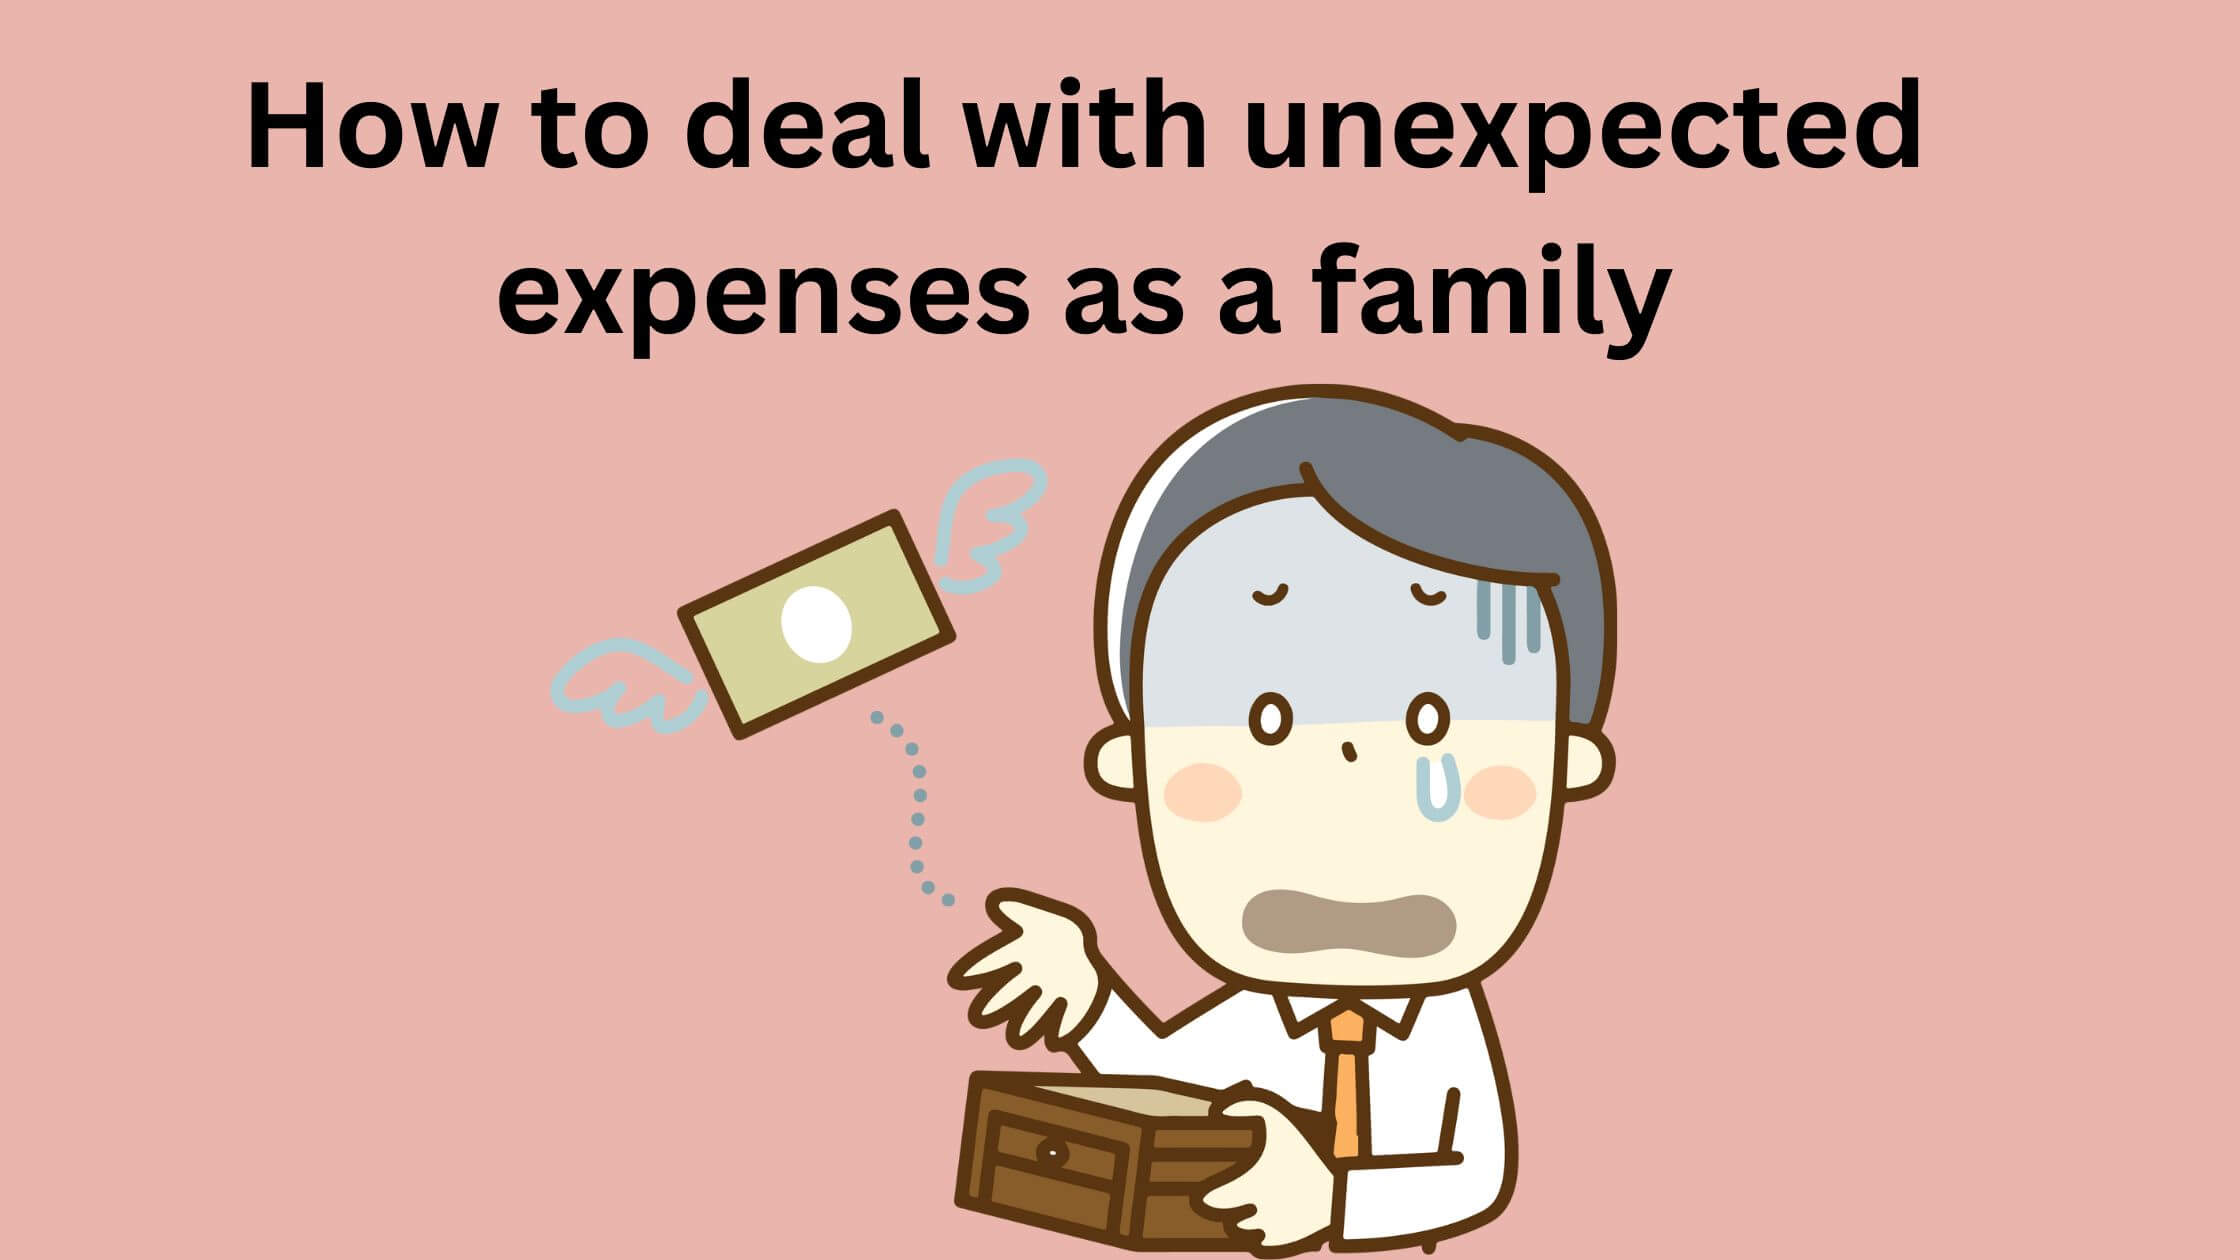 How to deal with unexpected expenses as a family